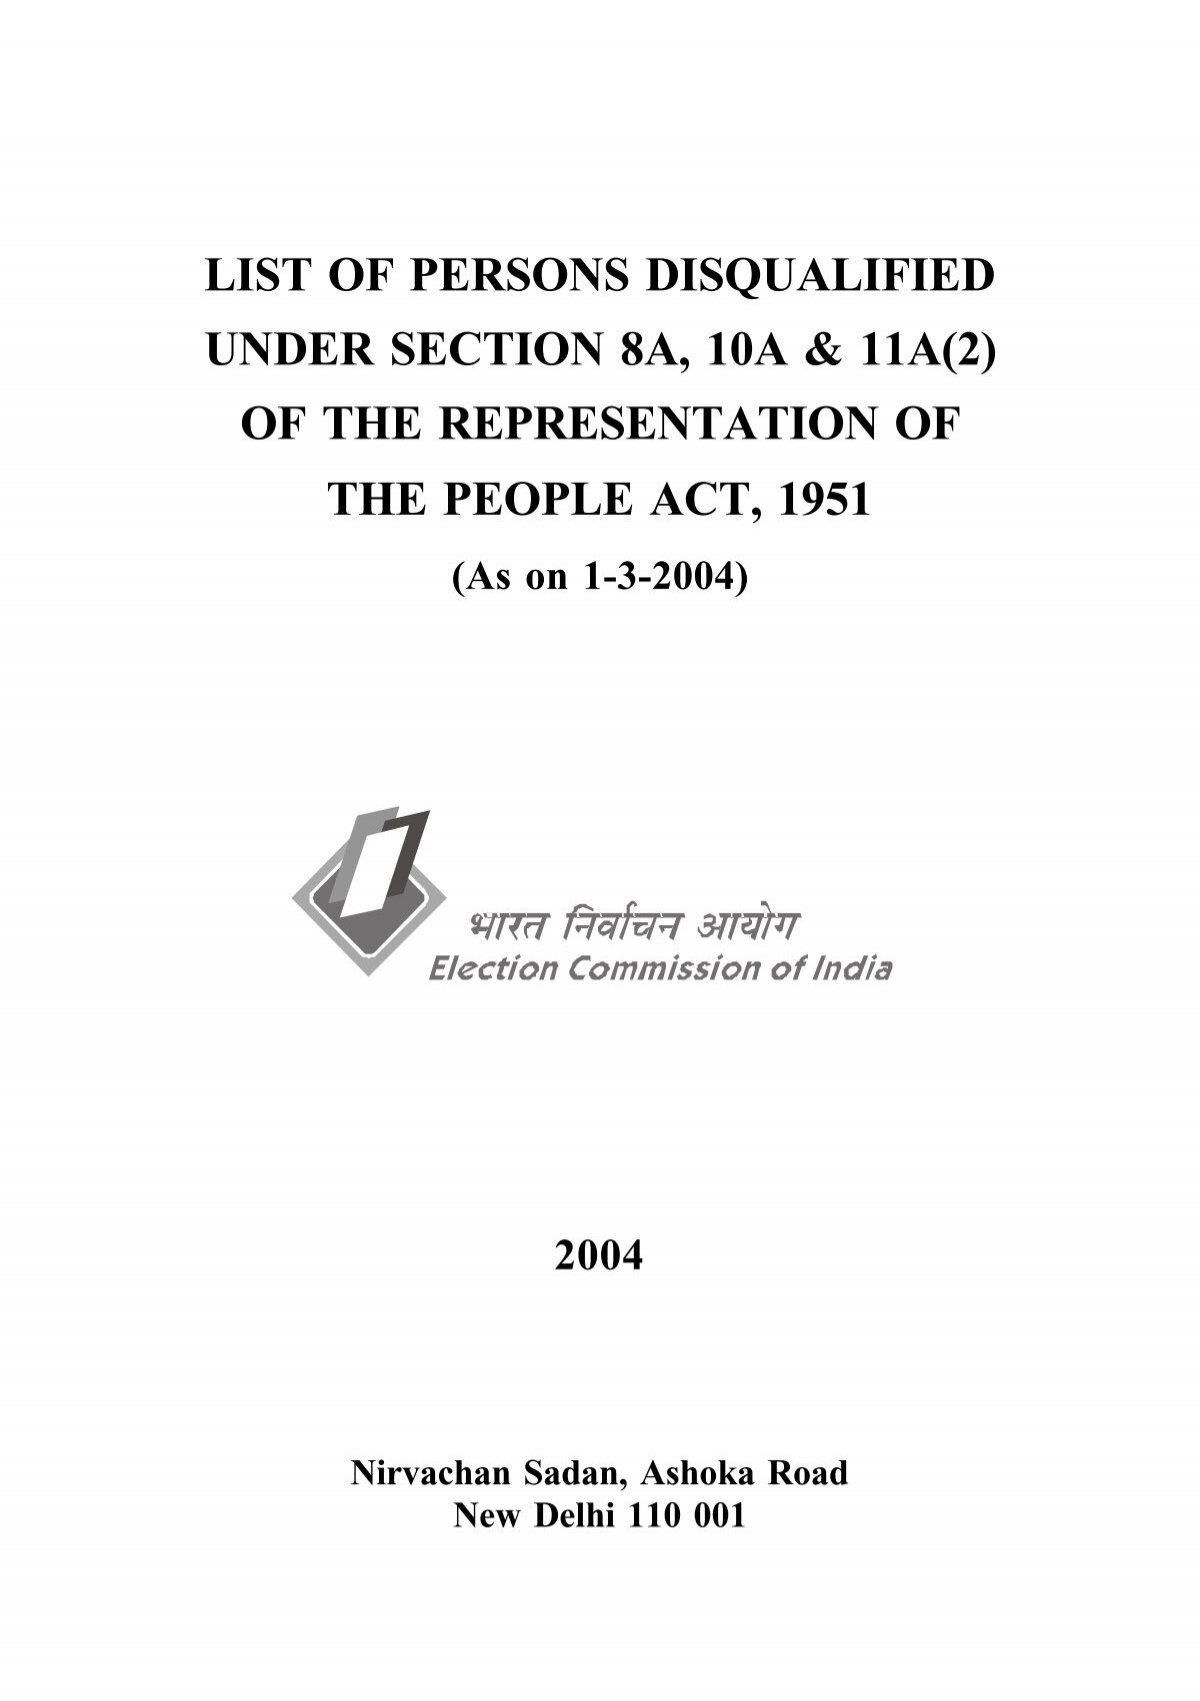 Extract from Representation of the People Act, 1951